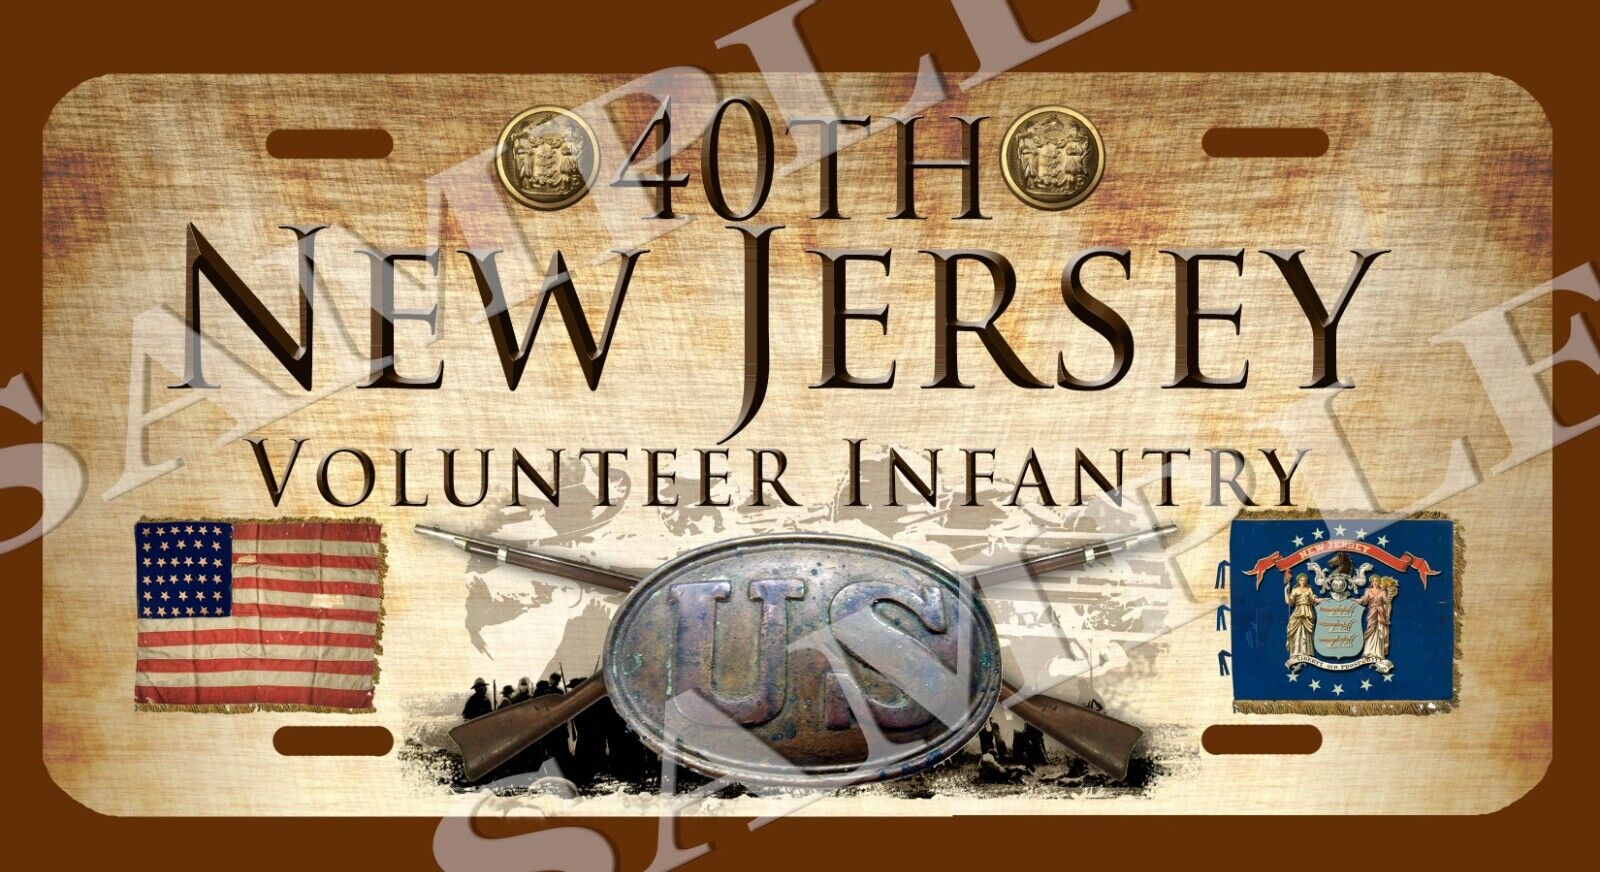 40th New Jersey Infantry American Civil War Themed vehicle license plate